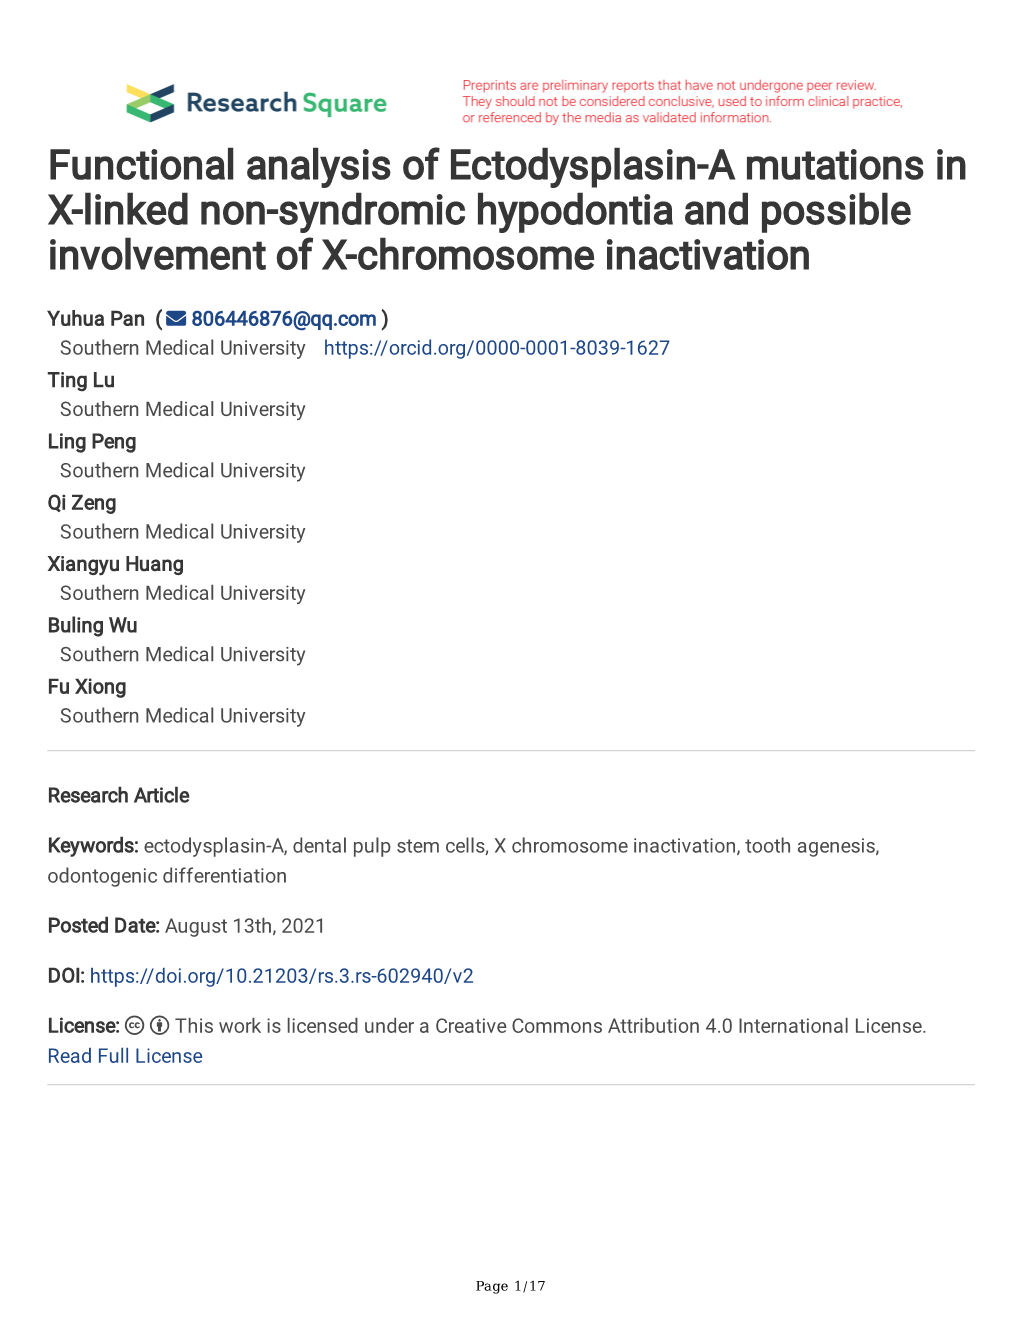 Functional Analysis of Ectodysplasin-A Mutations in X-Linked Non-Syndromic Hypodontia and Possible Involvement of X-Chromosome Inactivation